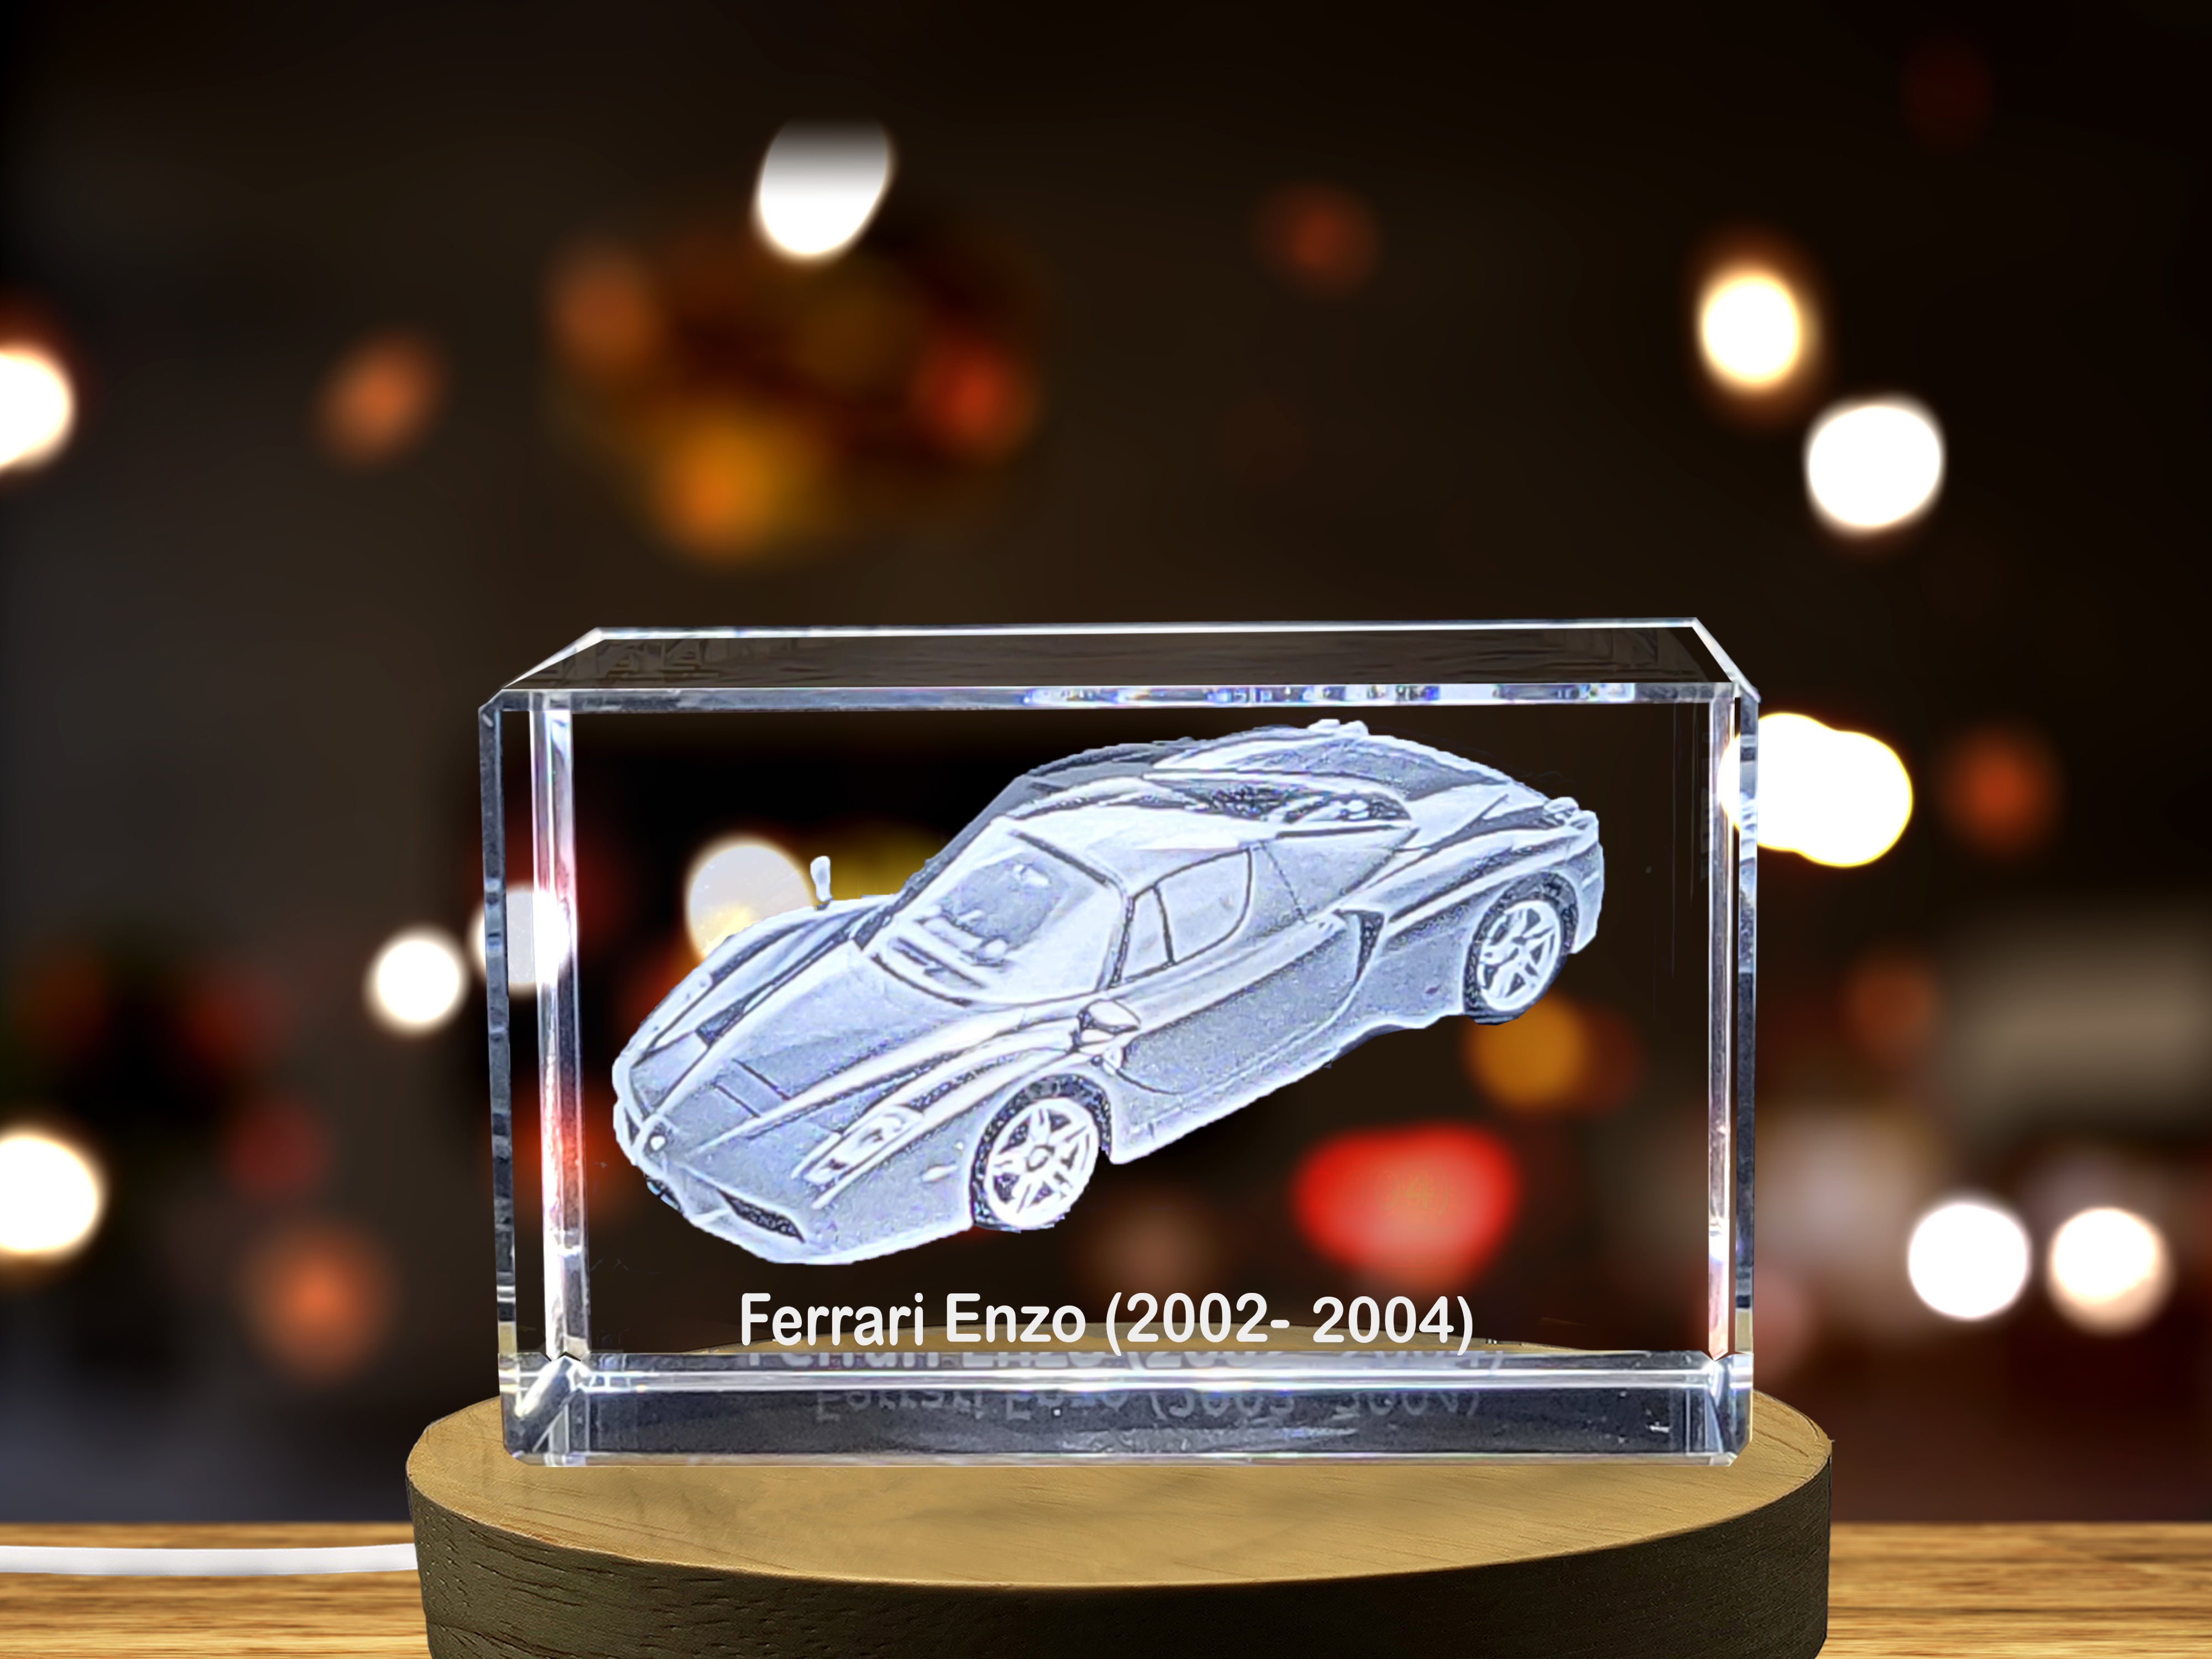 Ferrari Enzo (2002–2004) - A Legendary Supercar Immortalized in 3D Engraved Crystal A&B Crystal Collection